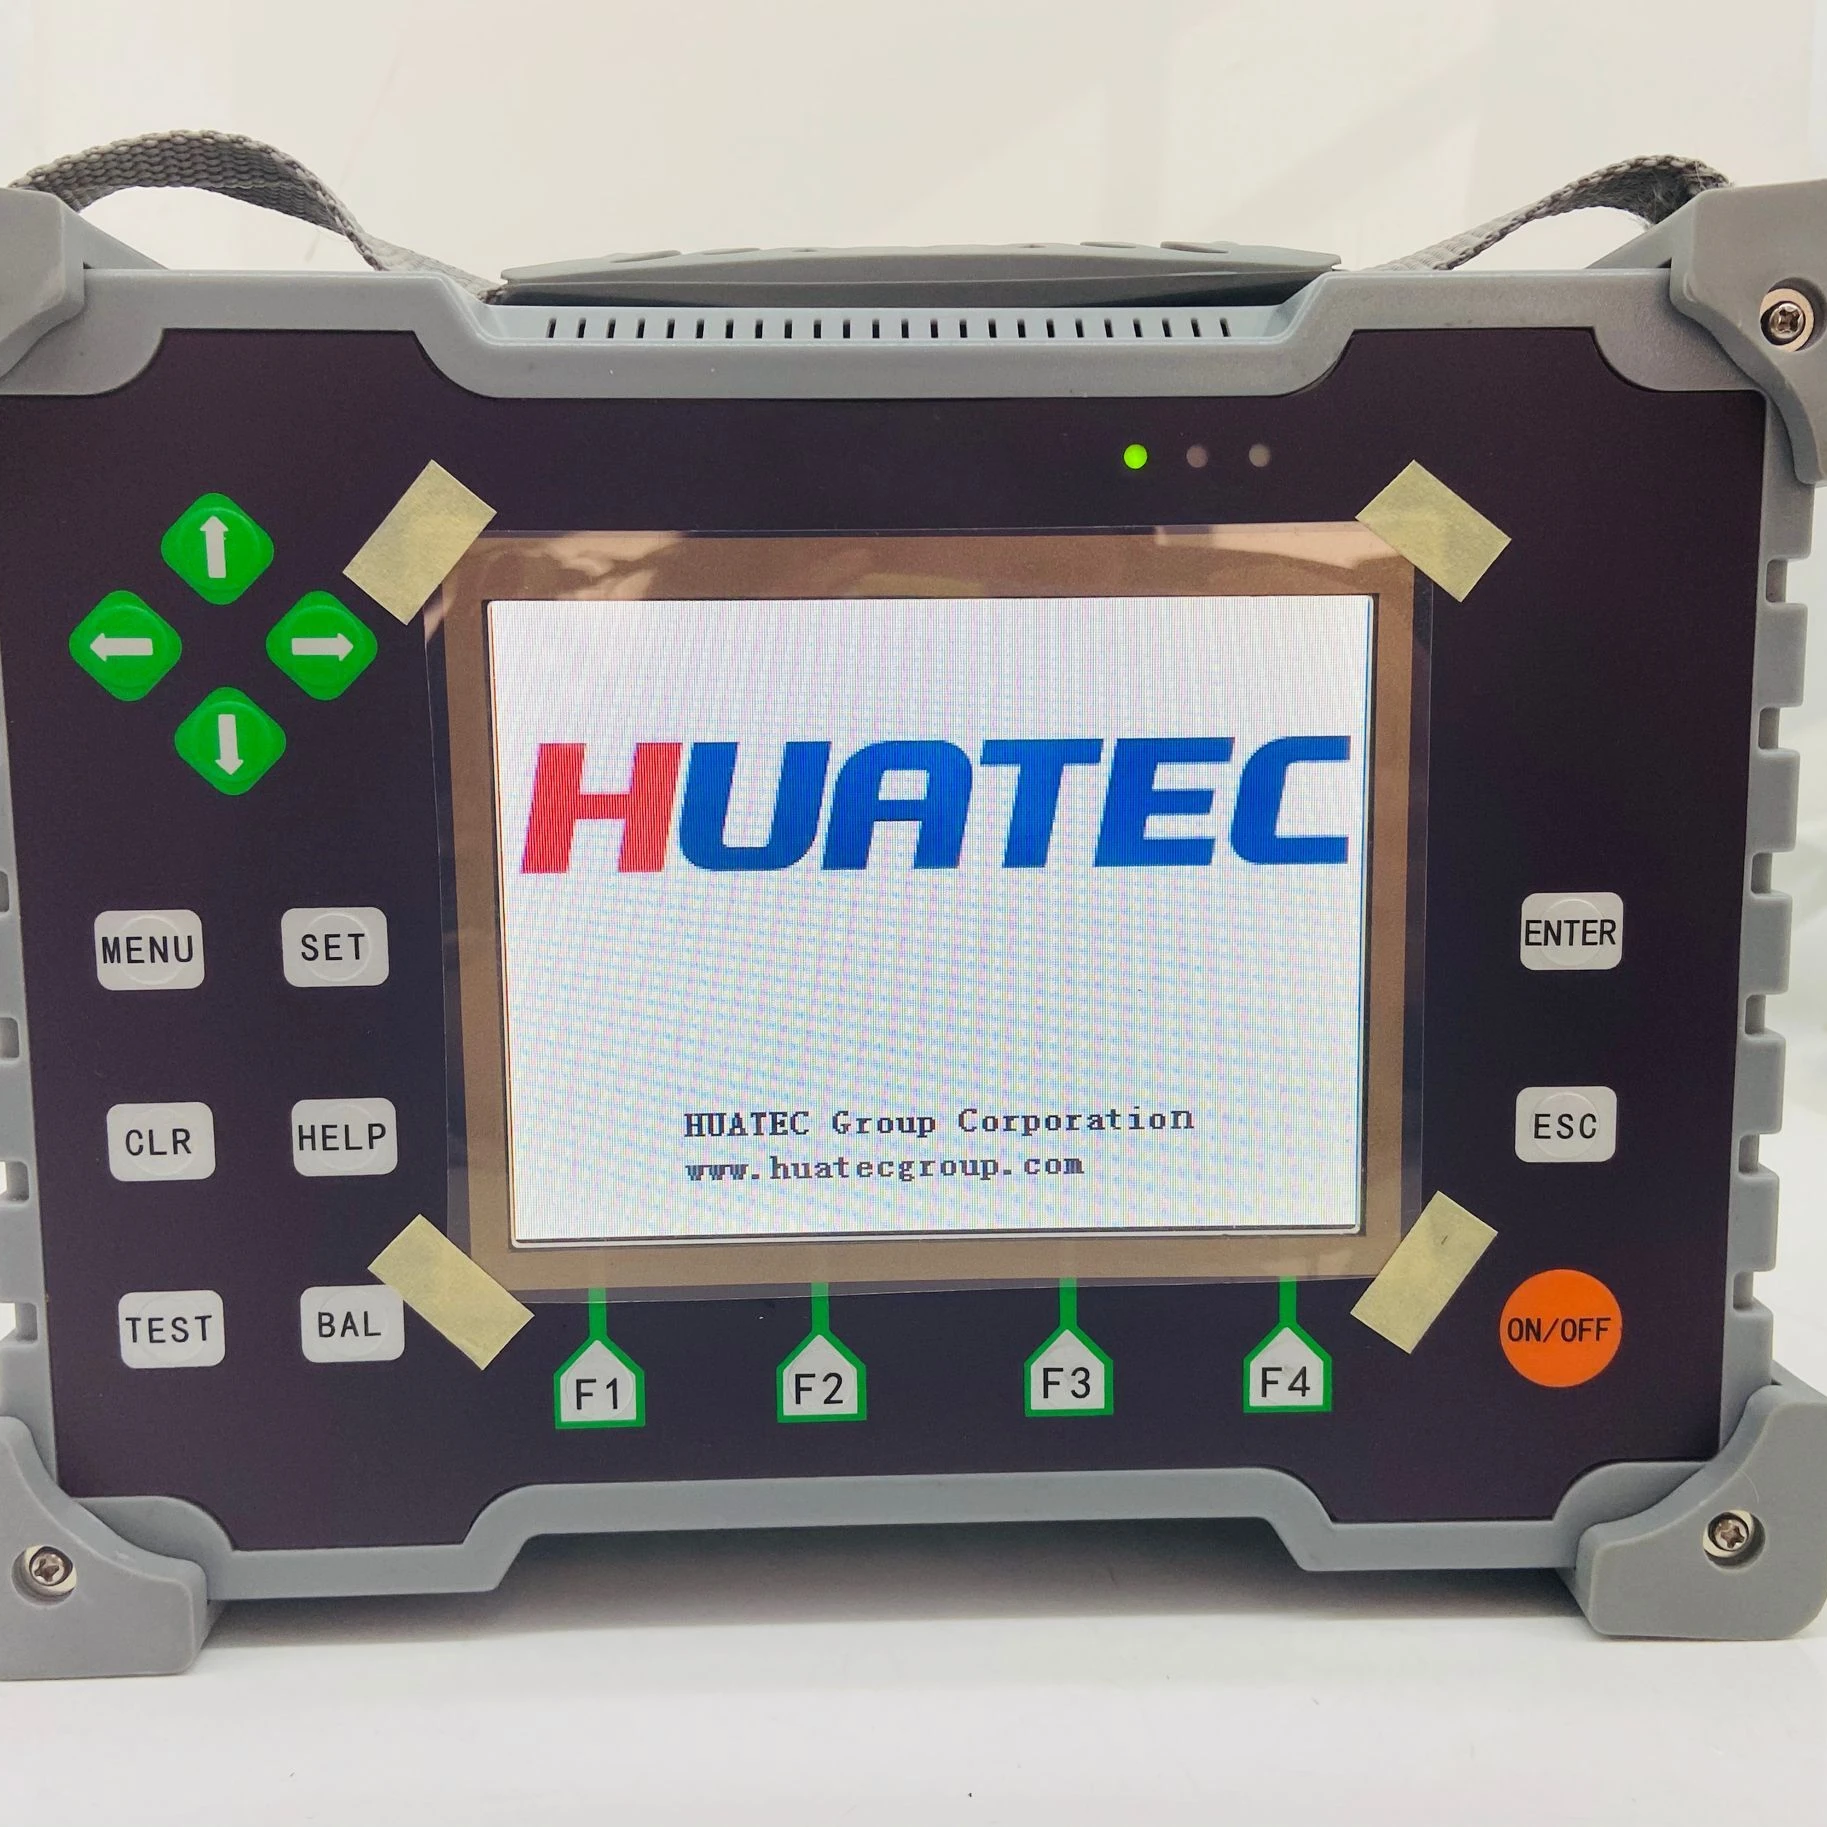 

HUATEC Range Intelligent Dual Frequency Eddy Current Detector In Digital Electronic Balance